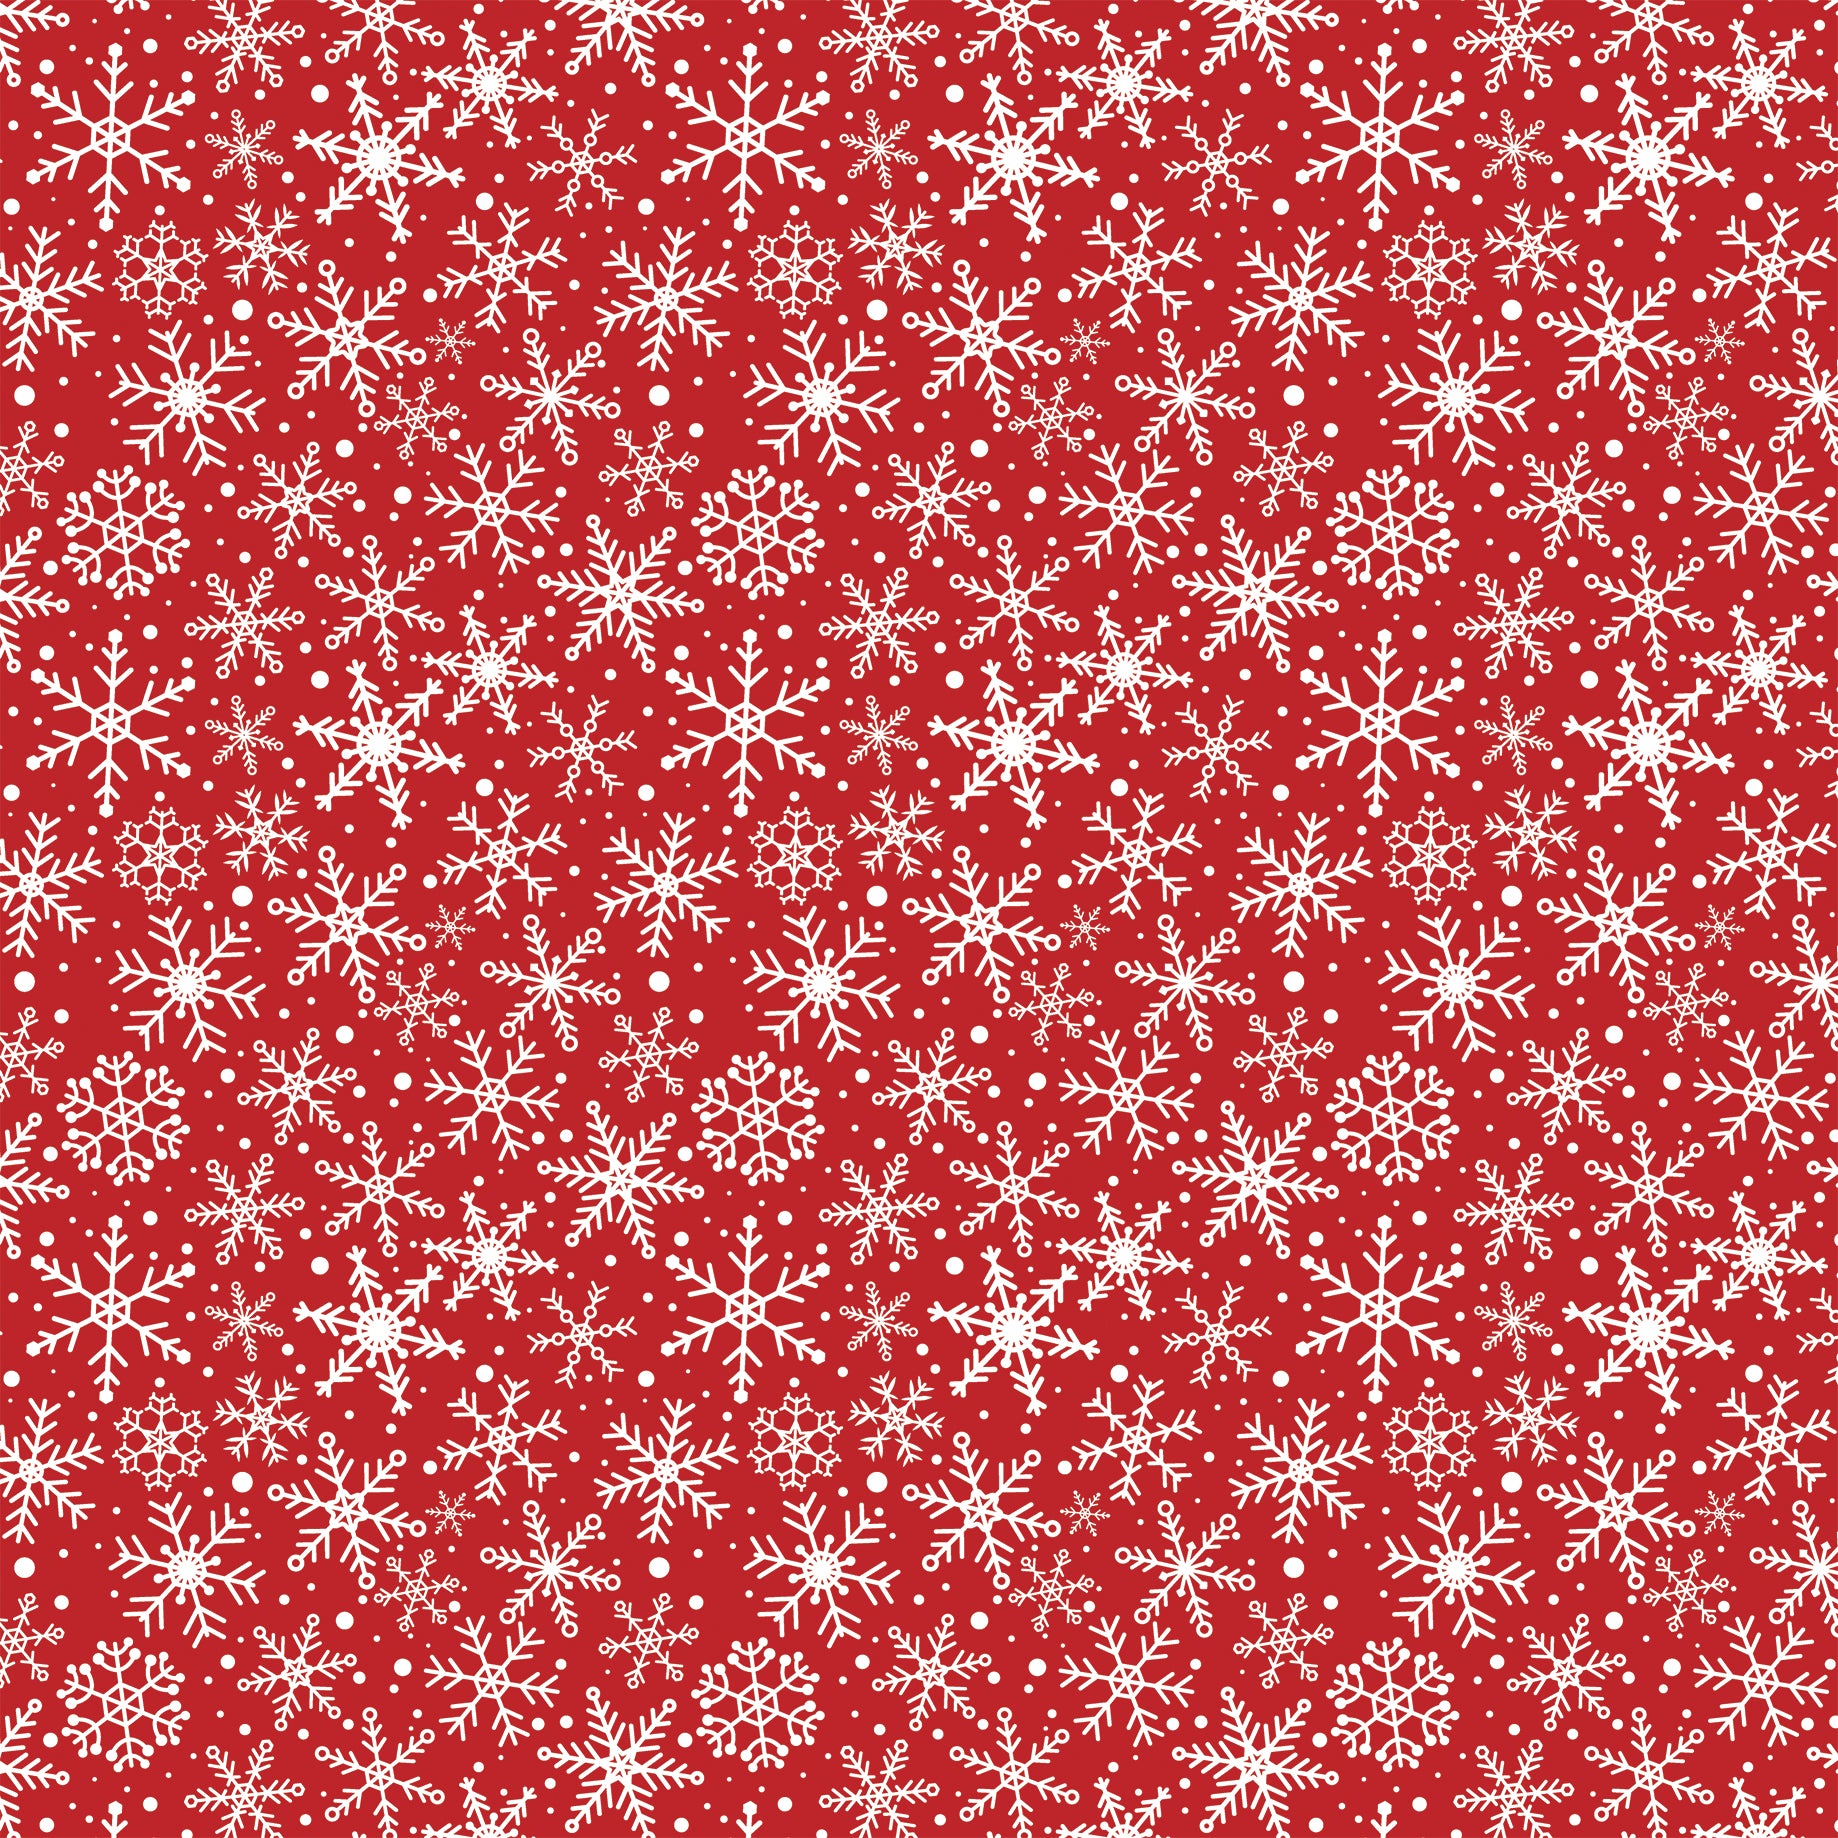 Have A Holly Jolly Christmas Collection Jolly Snowflakes 12 x 12 Double-Sided Scrapbook Paper by Echo Park Paper